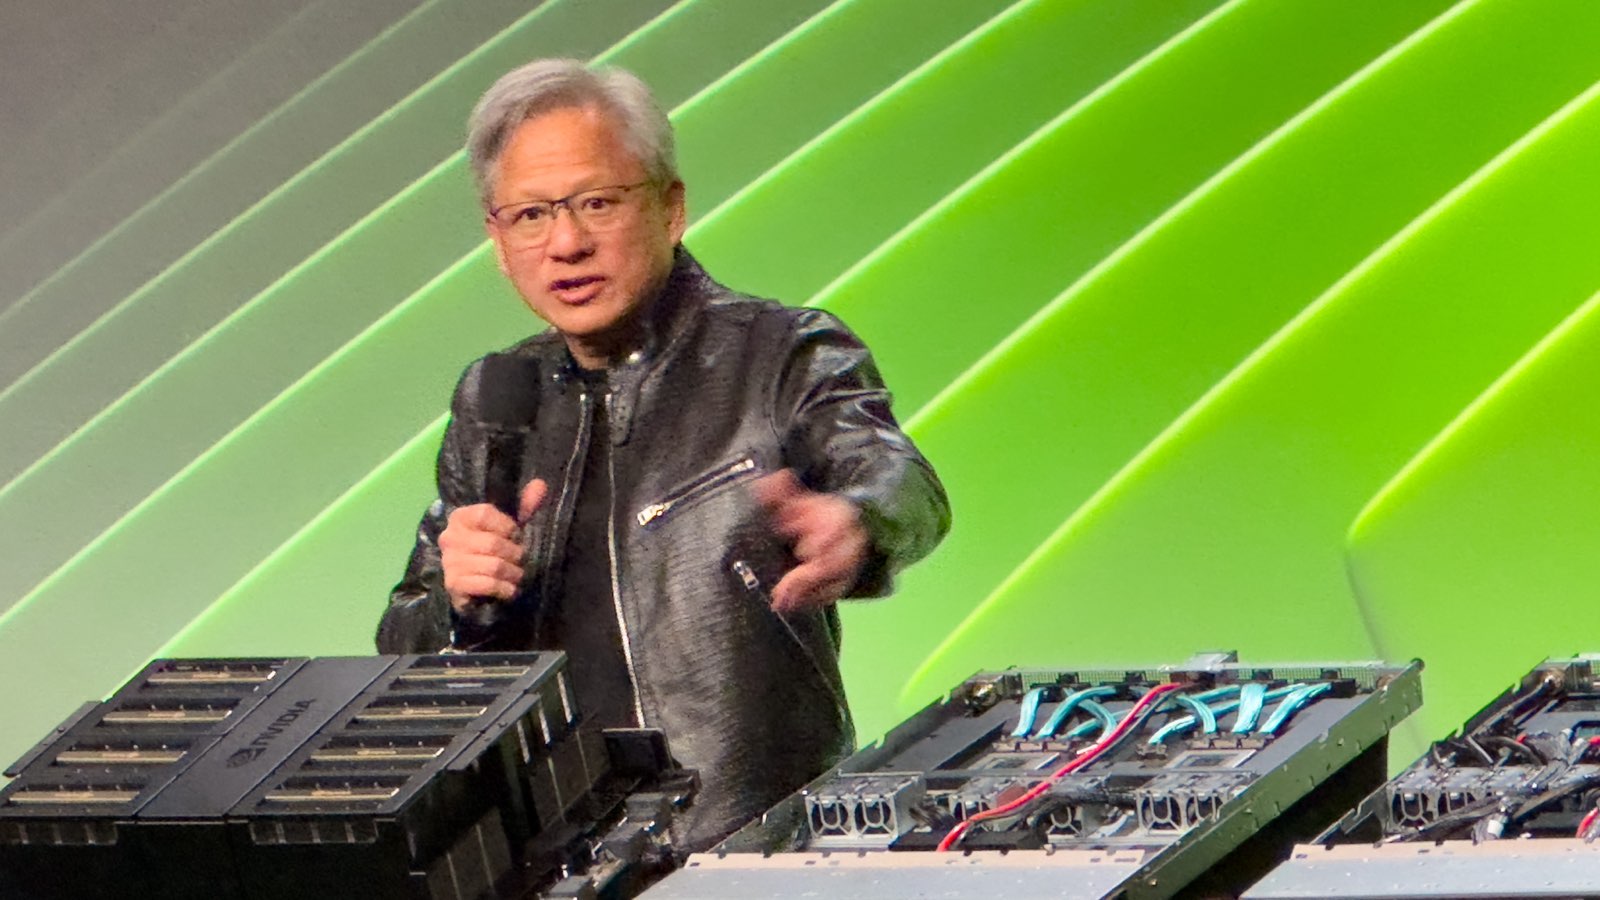 Nvidia’s Jensen Huang says AI hallucinations are solvable, artificial general intelligence is 5 years away